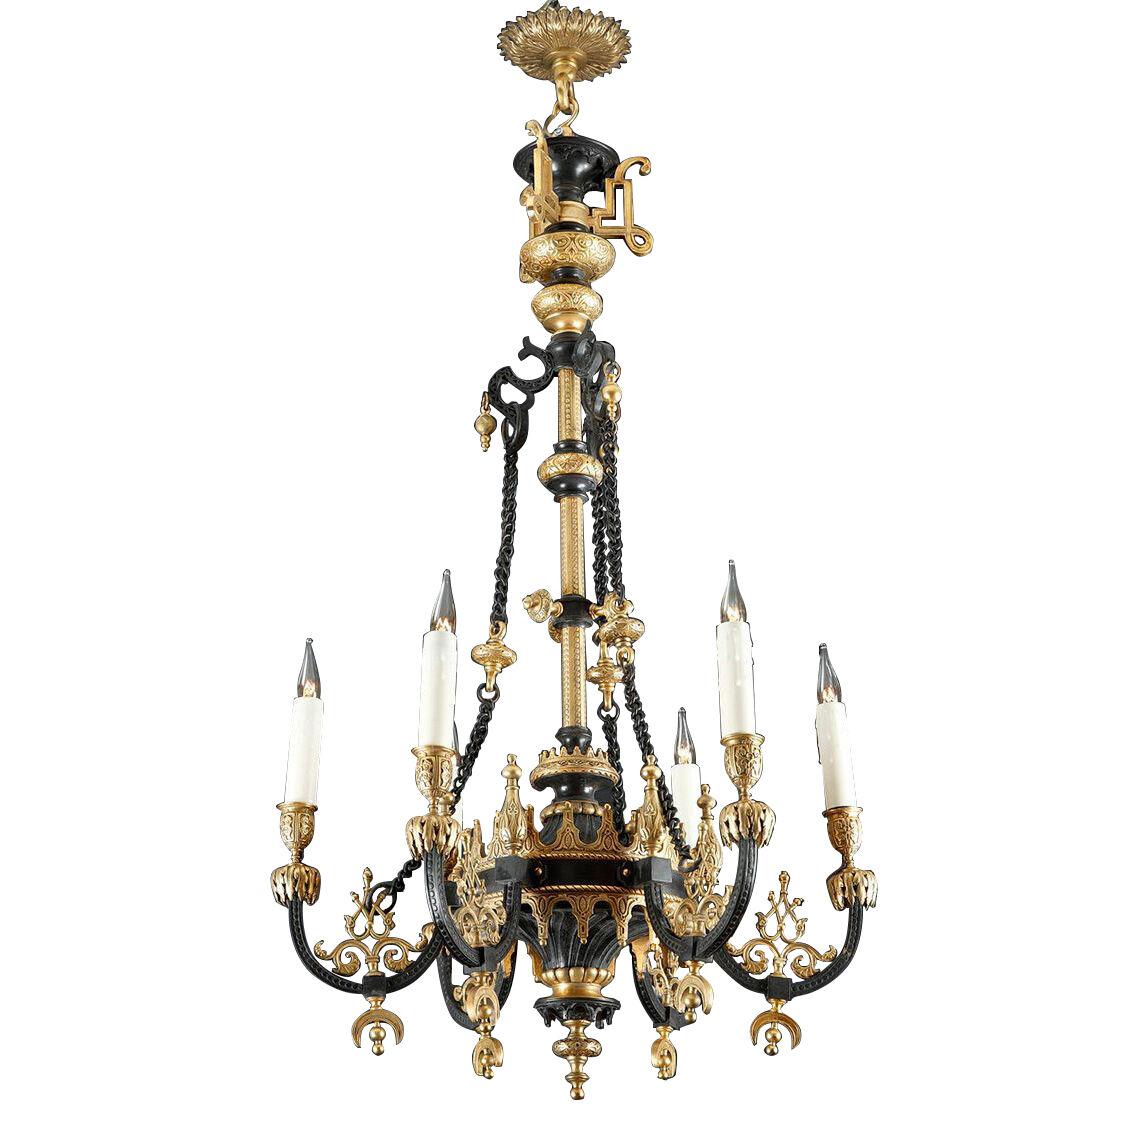 Ottoman Style Chandelier Attributed to F. Barbedienne, France, Circa 1870